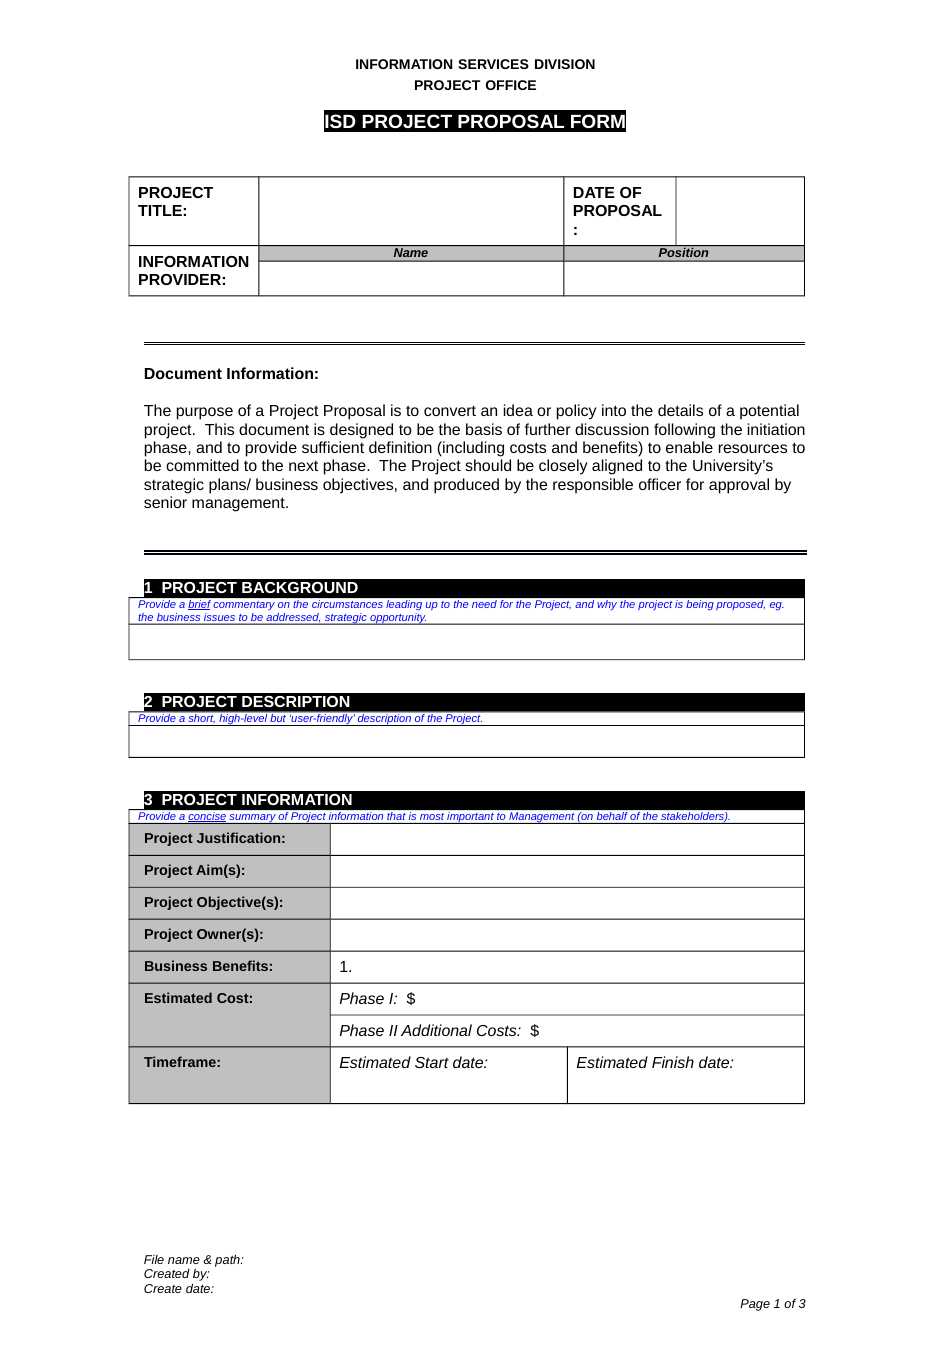 Isd Project Proposal Form - Flinders University, Page 1